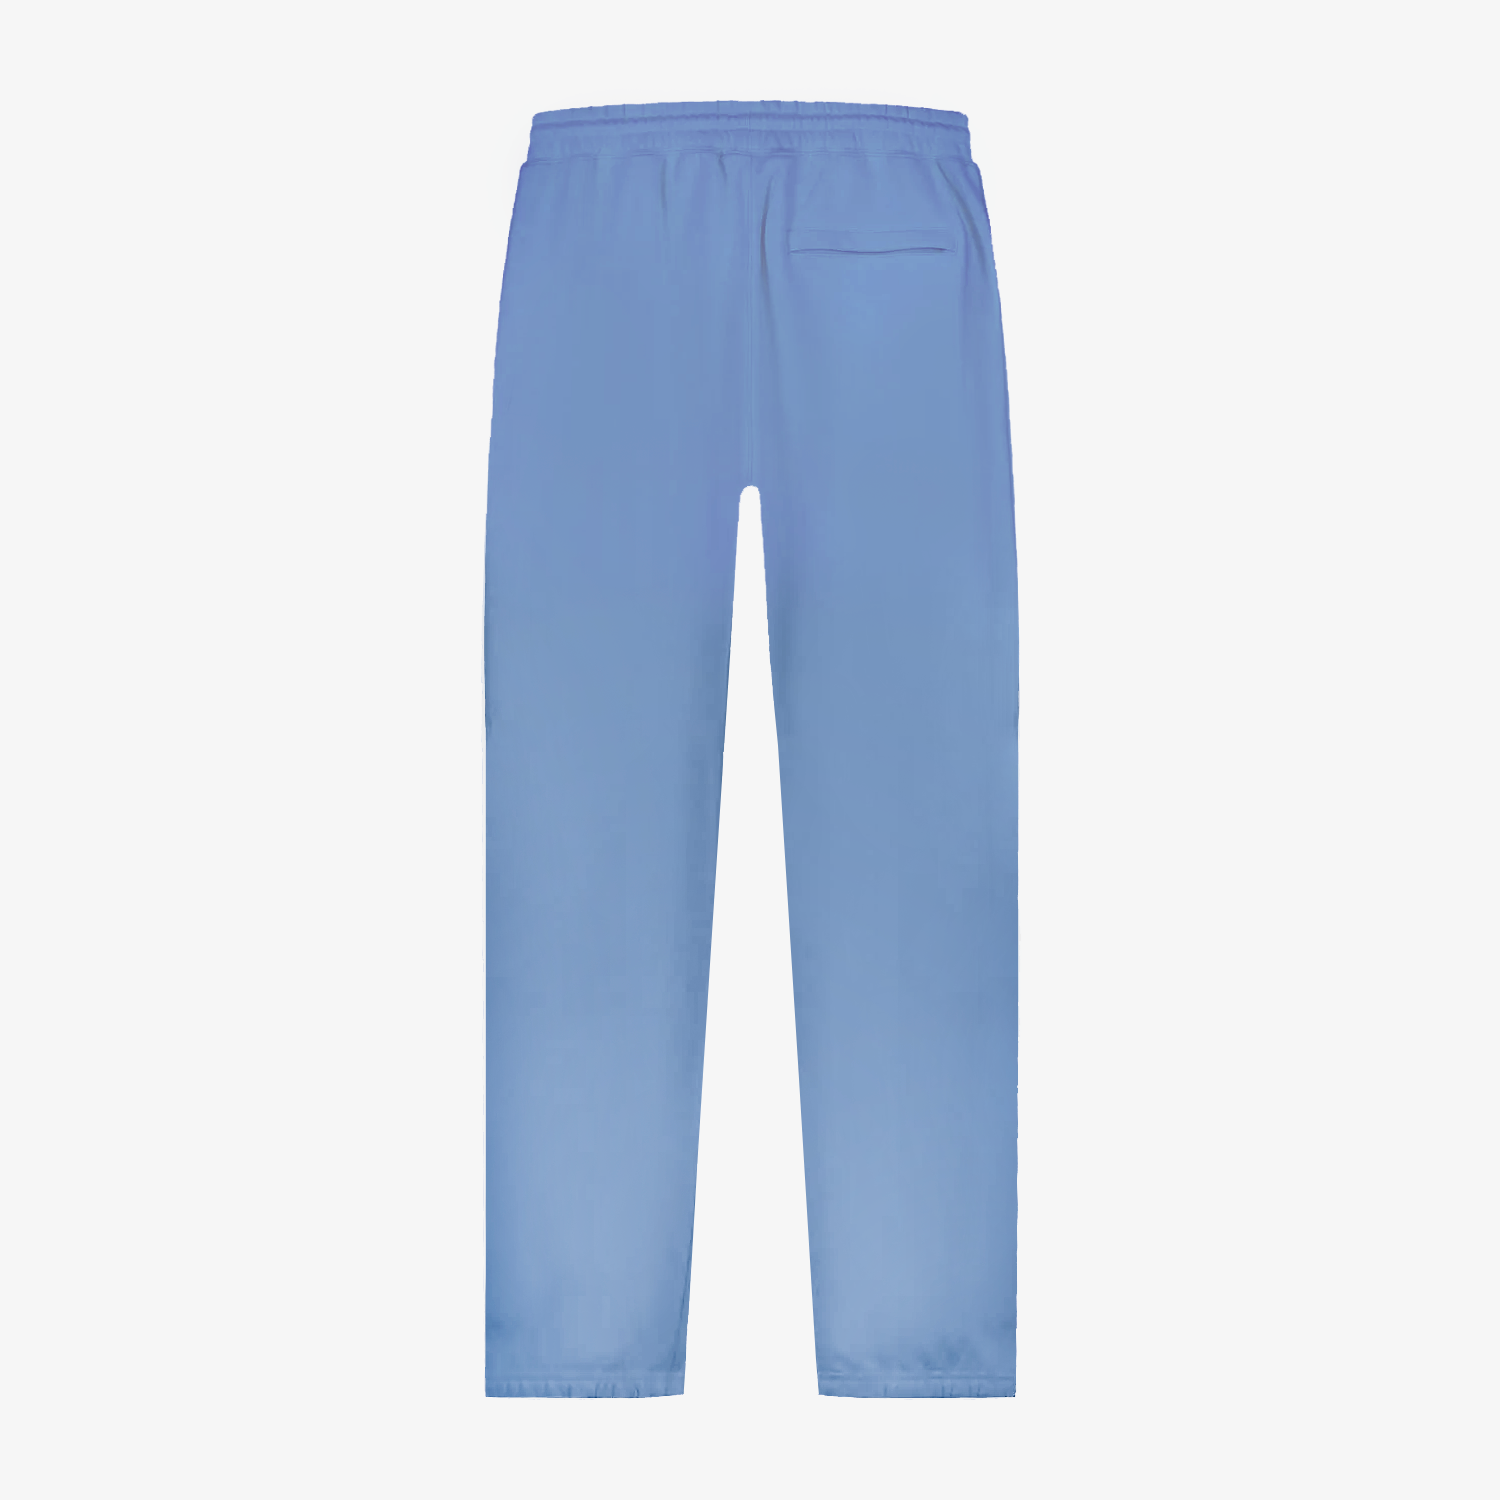 5ivepillars Relaxed Fit Sweatpants - Powder Blue